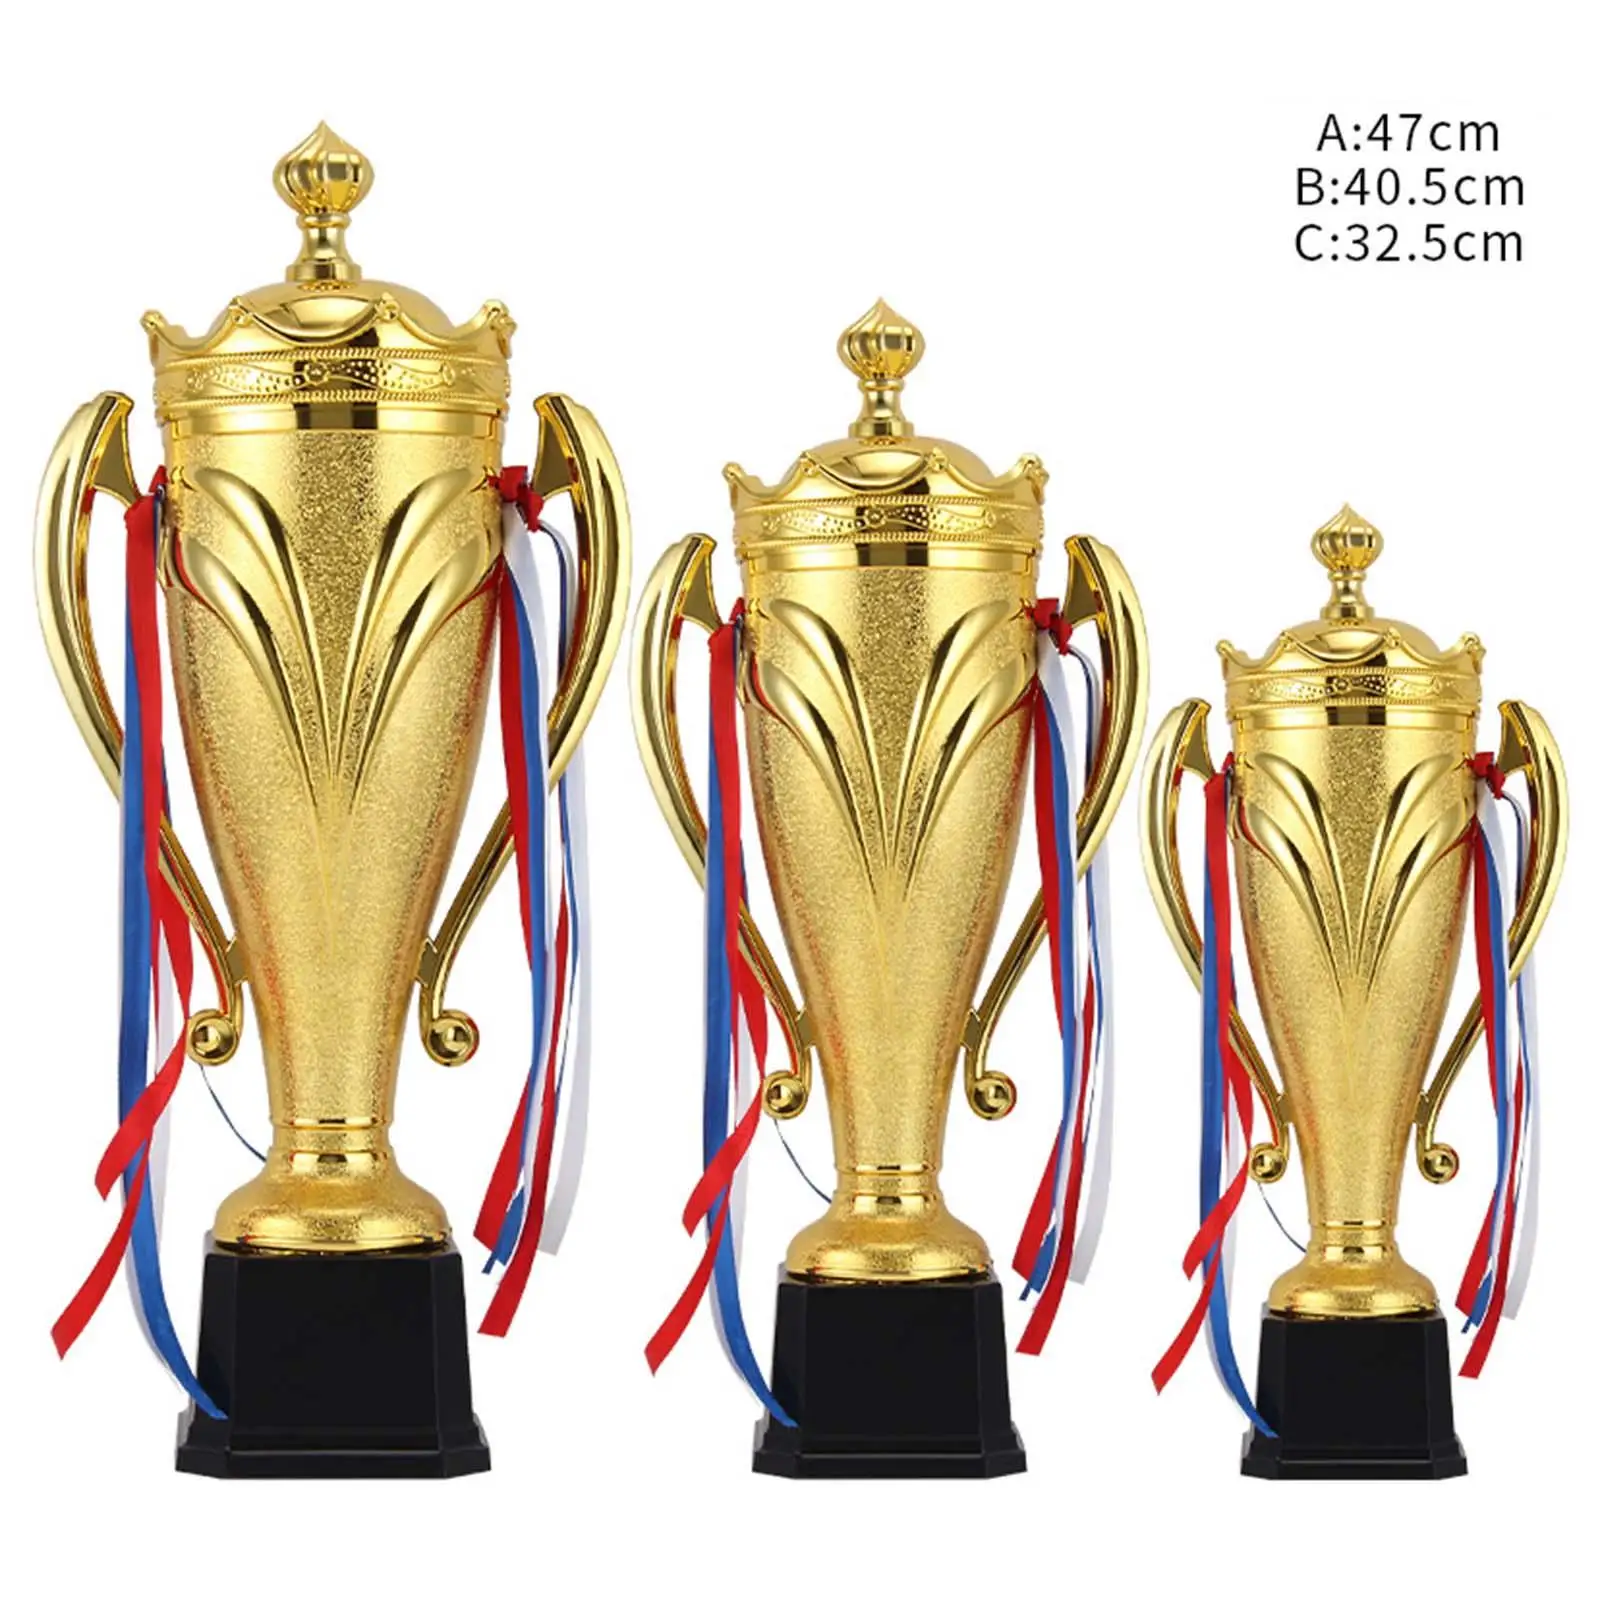 PP Material Winner Award Trophies Cup Gold Color Smooth Surface Exquisite Workmanship Versatile Rewards Prizes for Competitions